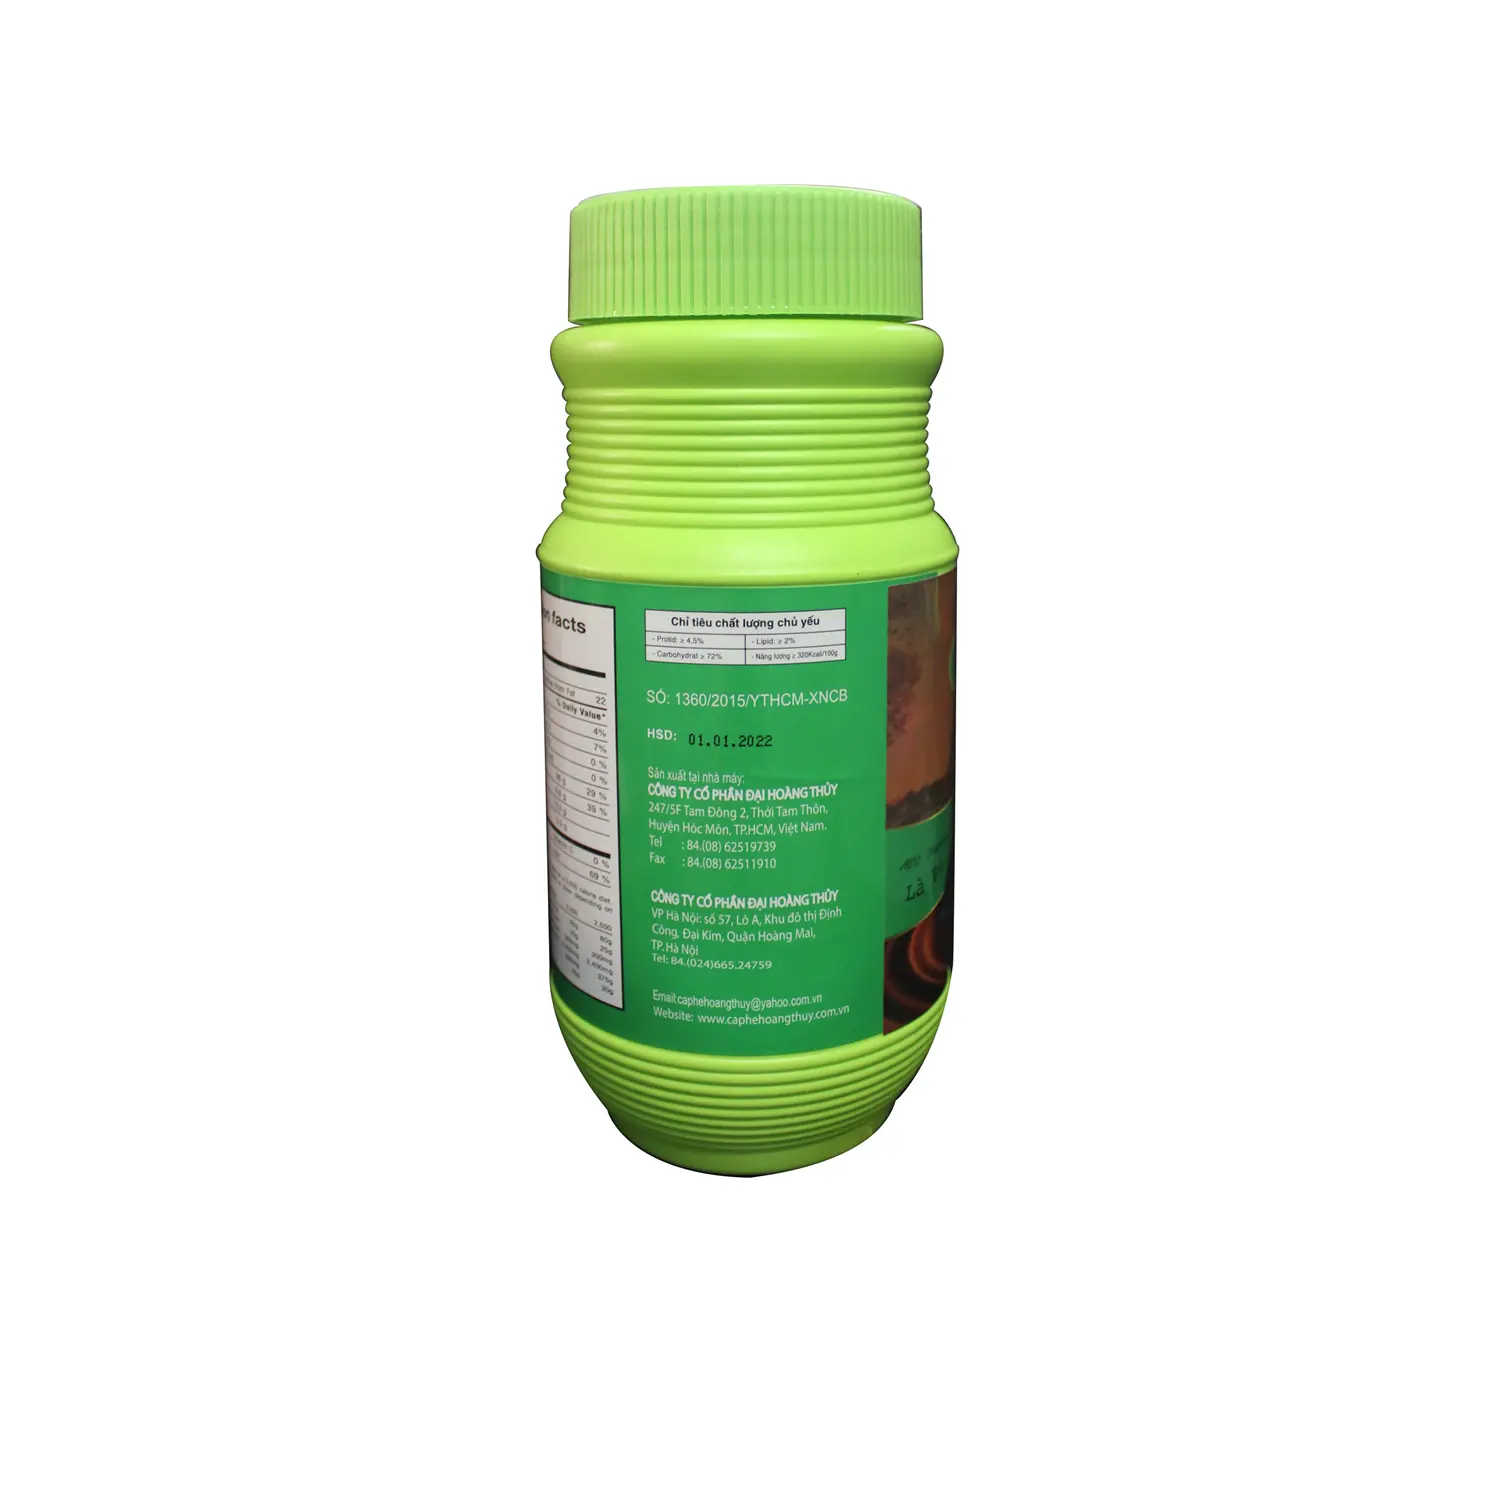 Powder Drink 3 in 1 Instant Cocoa Light Green Jar 500gr Brown Delicious Mixed Flavor Organic Cocoa Ingredients